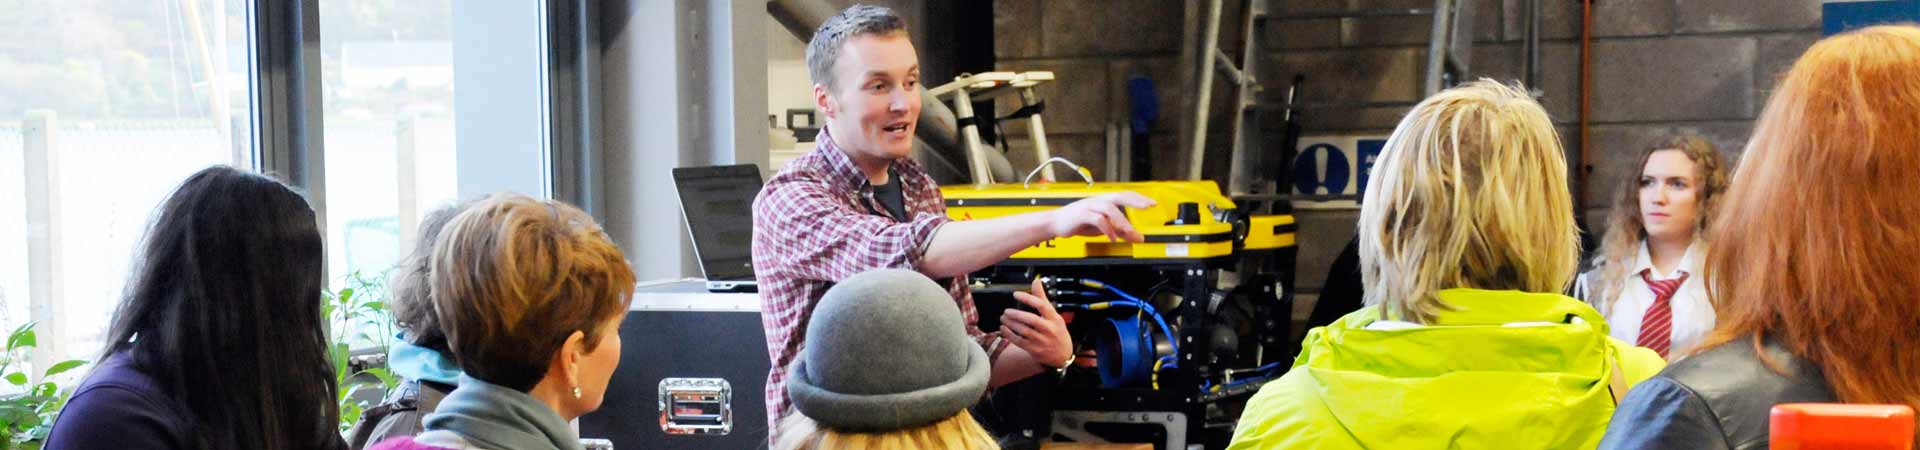 Image shows lecturer in our Scottish Marine Robotics Facility showing students different robots used in the marine environment